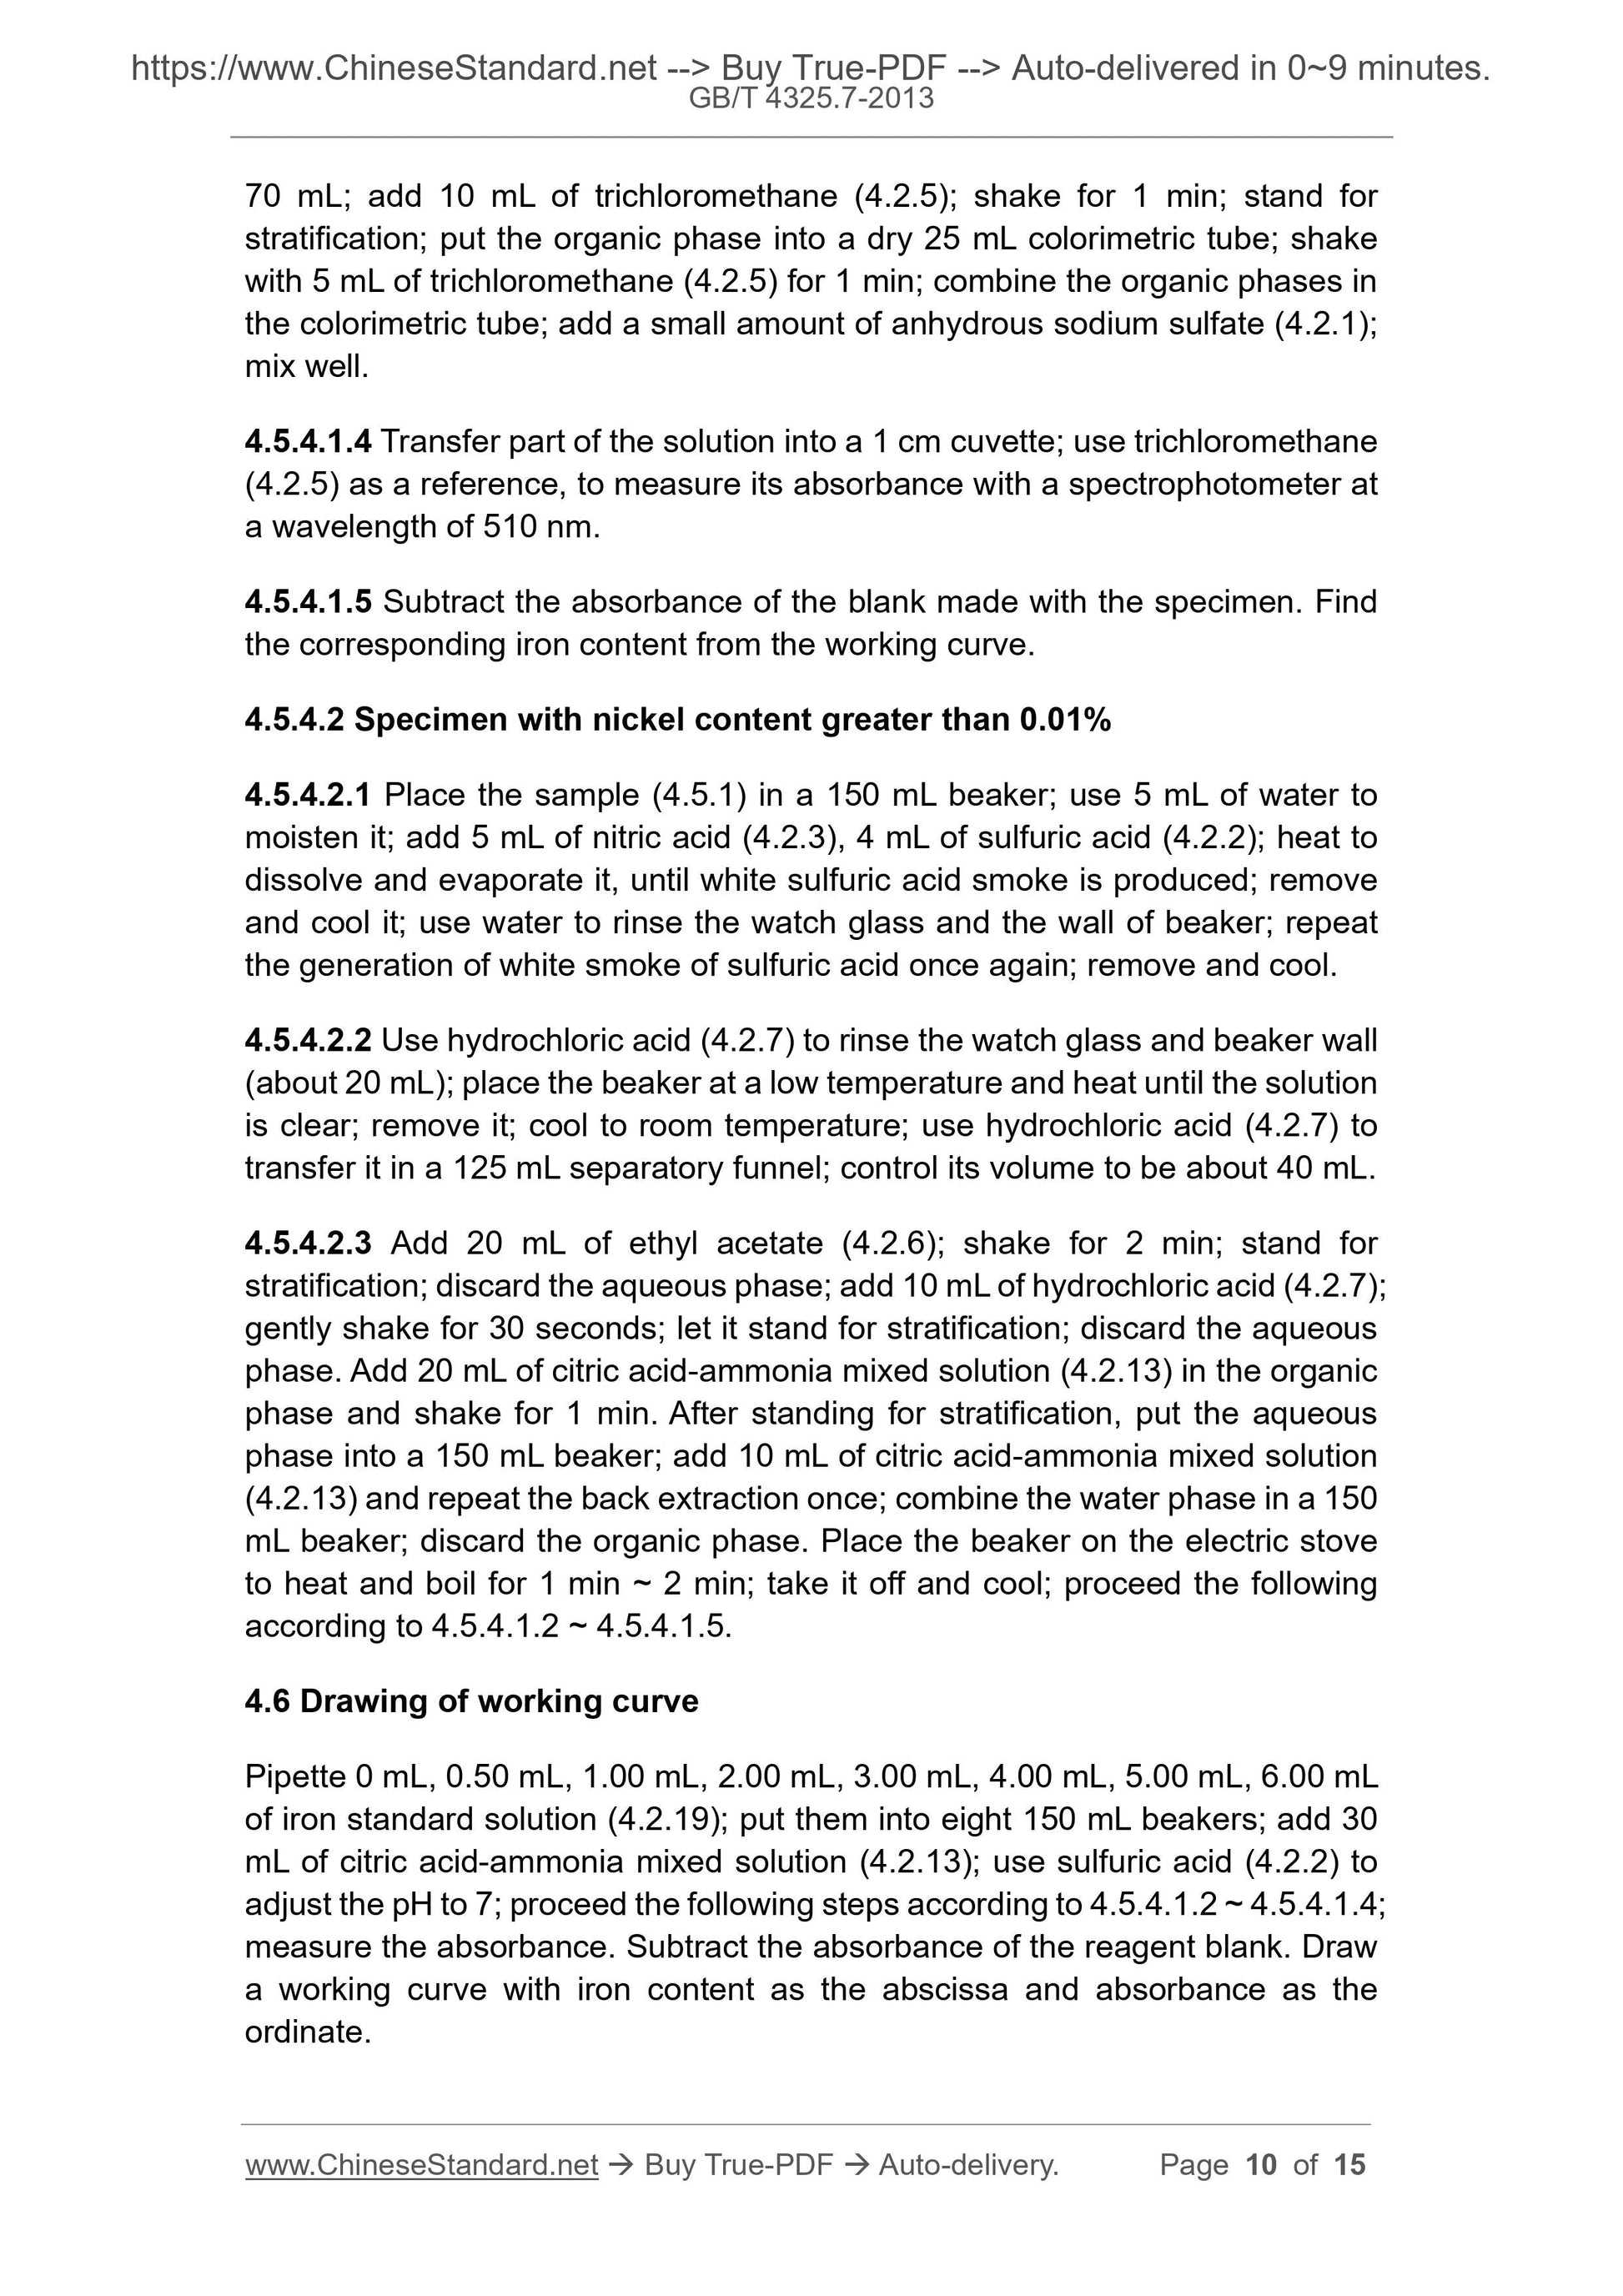 GB/T 4325.7-2013 Page 5